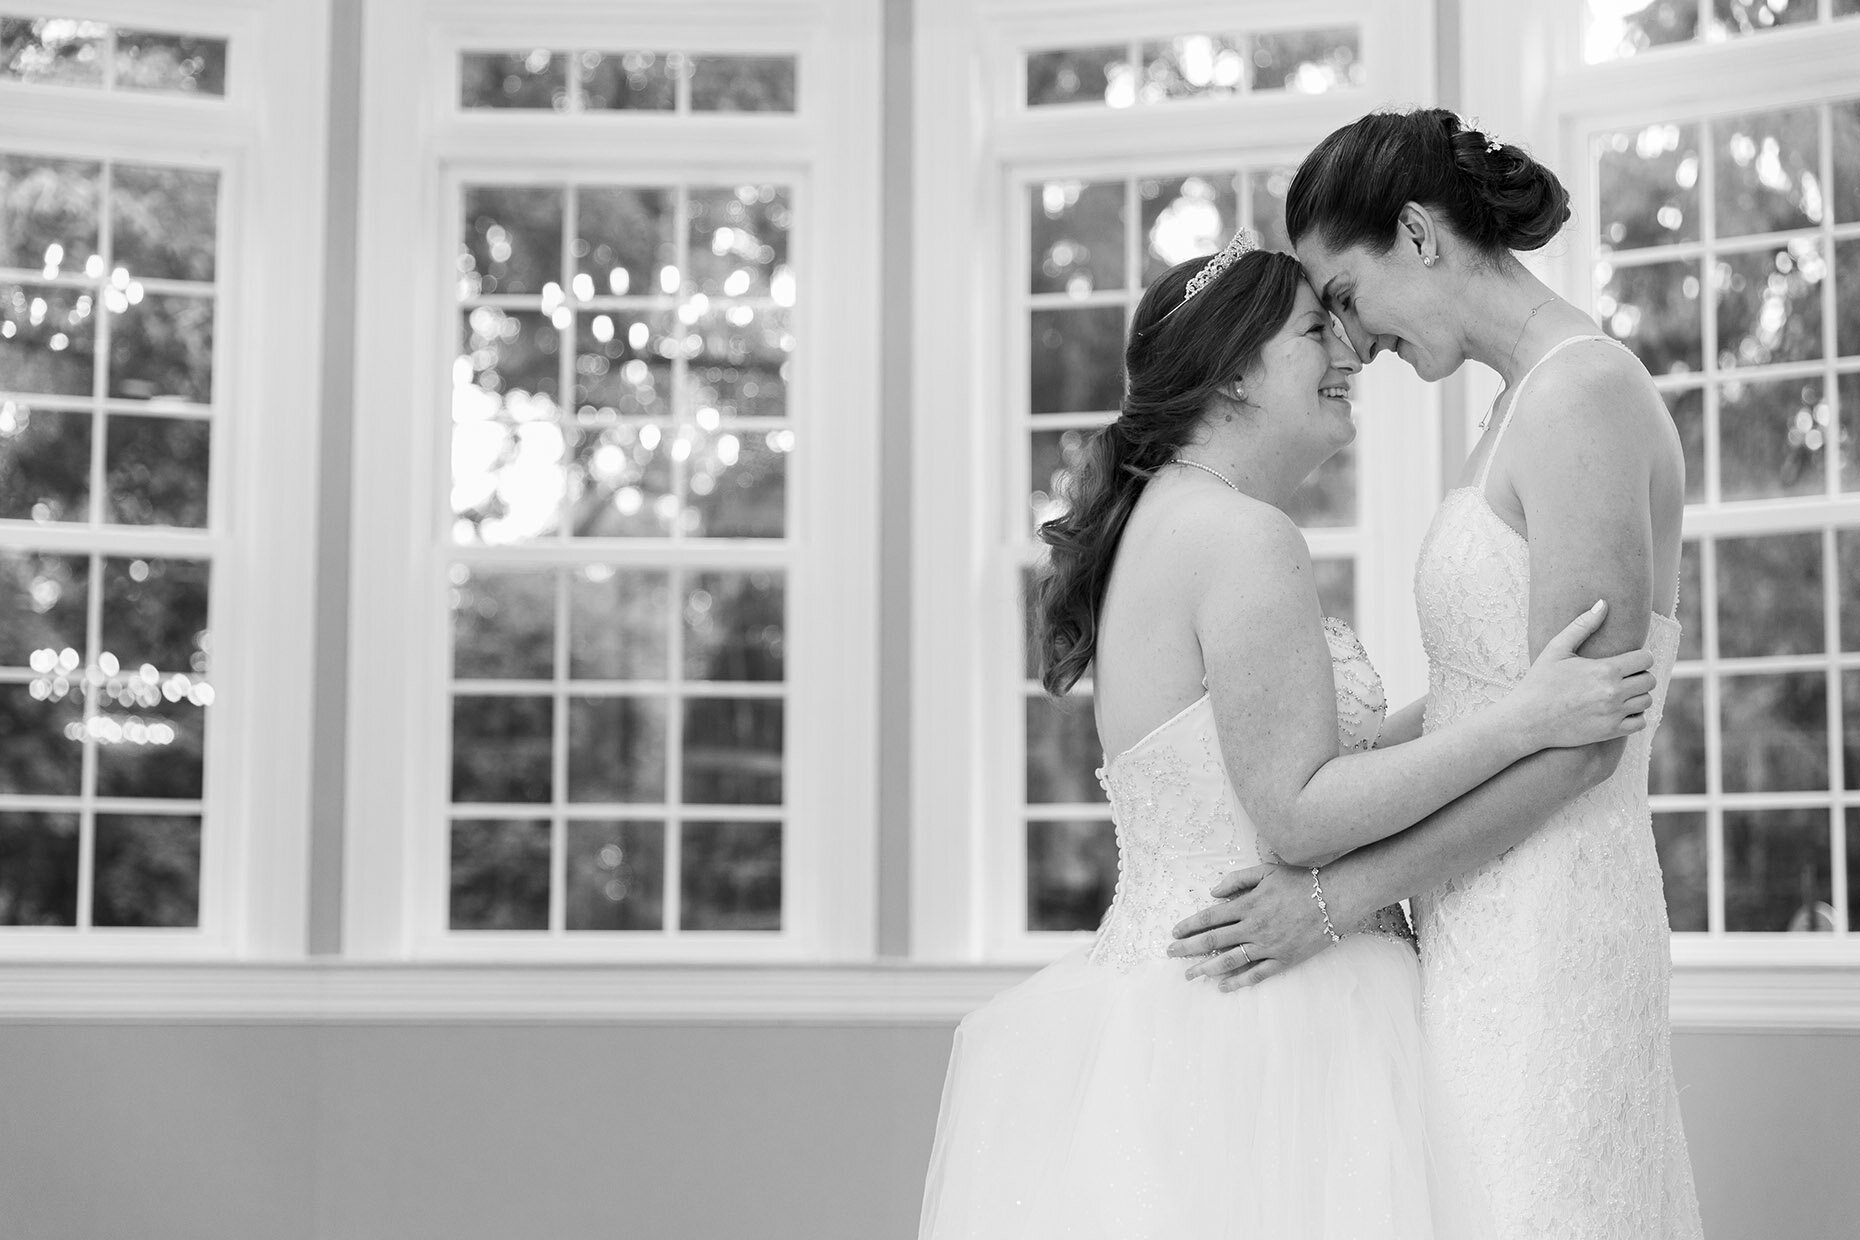 Black and white dancing photo at reception in front of windows